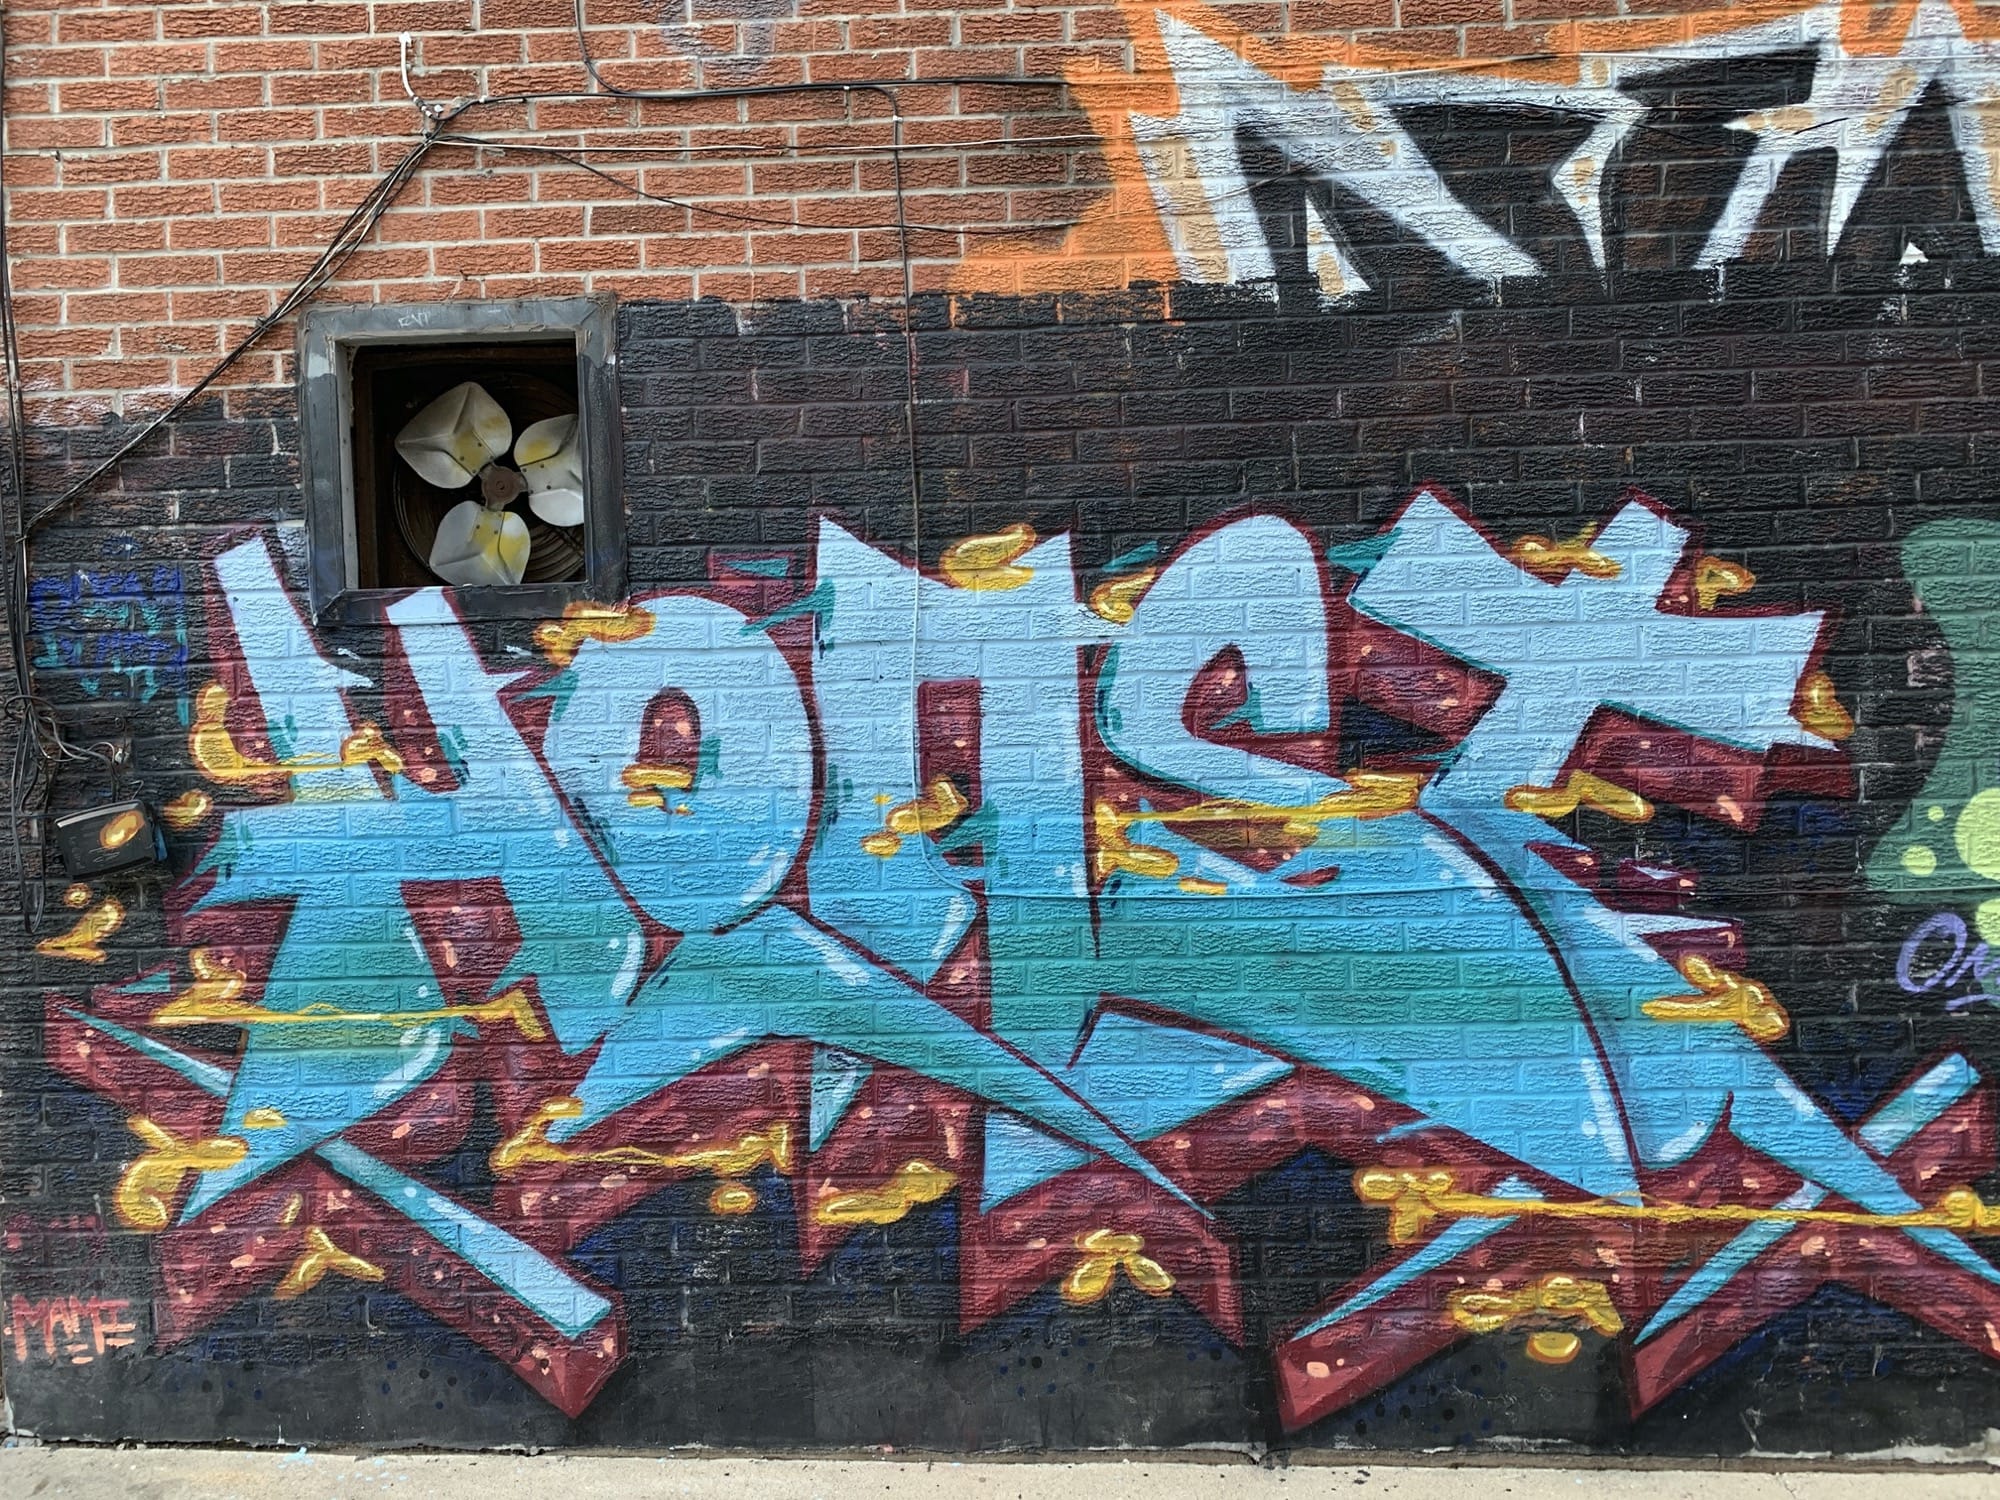 Graffiti 2390  captured by Rabot in Toronto Canada